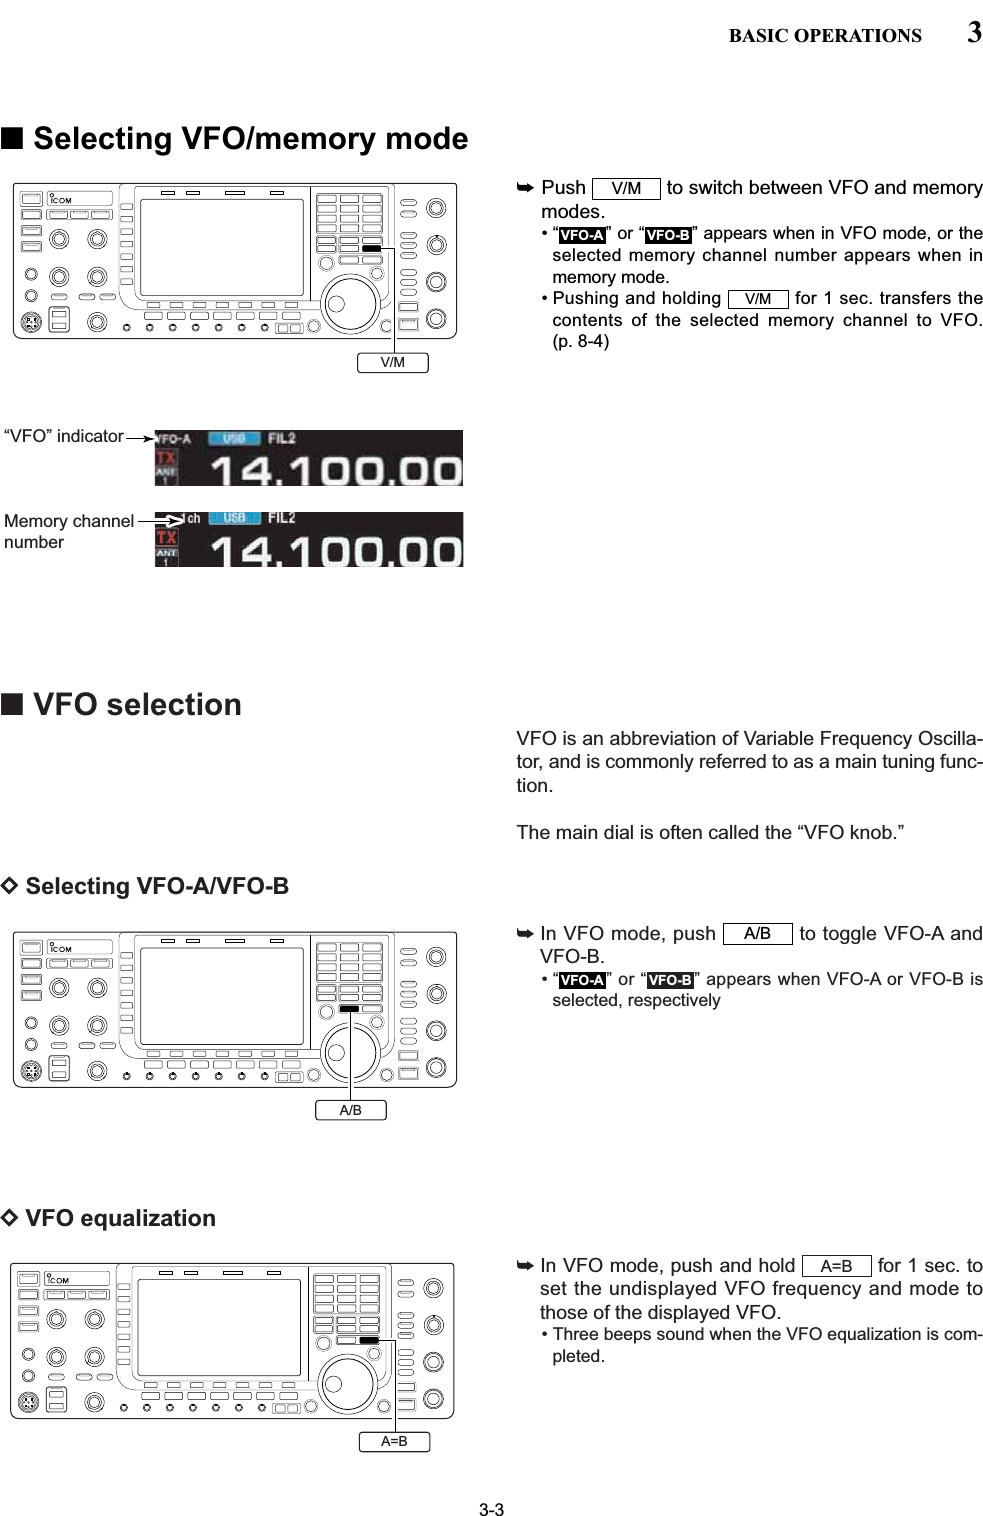 ■VFO selectionVFO is an abbreviation of Variable Frequency Oscilla-tor, and is commonly referred to as a main tuning func-tion.The main dial is often called the “VFO knob.”DSelecting VFO-A/VFO-B➥In VFO mode, push  to toggle VFO-A andVFO-B.• “ ” or “ ” appears when VFO-A or VFO-B isselected, respectively DVFO equalization➥In VFO mode, push and hold  for 1 sec. toset the undisplayed VFO frequency and mode tothose of the displayed VFO.• Three beeps sound when the VFO equalization is com-pleted.A=BVFO-BVFO-AA/B3-33BASIC OPERATIONS■Selecting VFO/memory mode➥Push  to switch between VFO and memorymodes.• “ ” or “ ” appears when in VFO mode, or theselected memory channel number appears when inmemory mode.• Pushing and holding  for 1 sec. transfers thecontents of the selected memory channel to VFO. (p. 8-4)V/MVFO-BVFO-AV/MV/M“VFO” indicatorMemory channelnumberA/BA=B